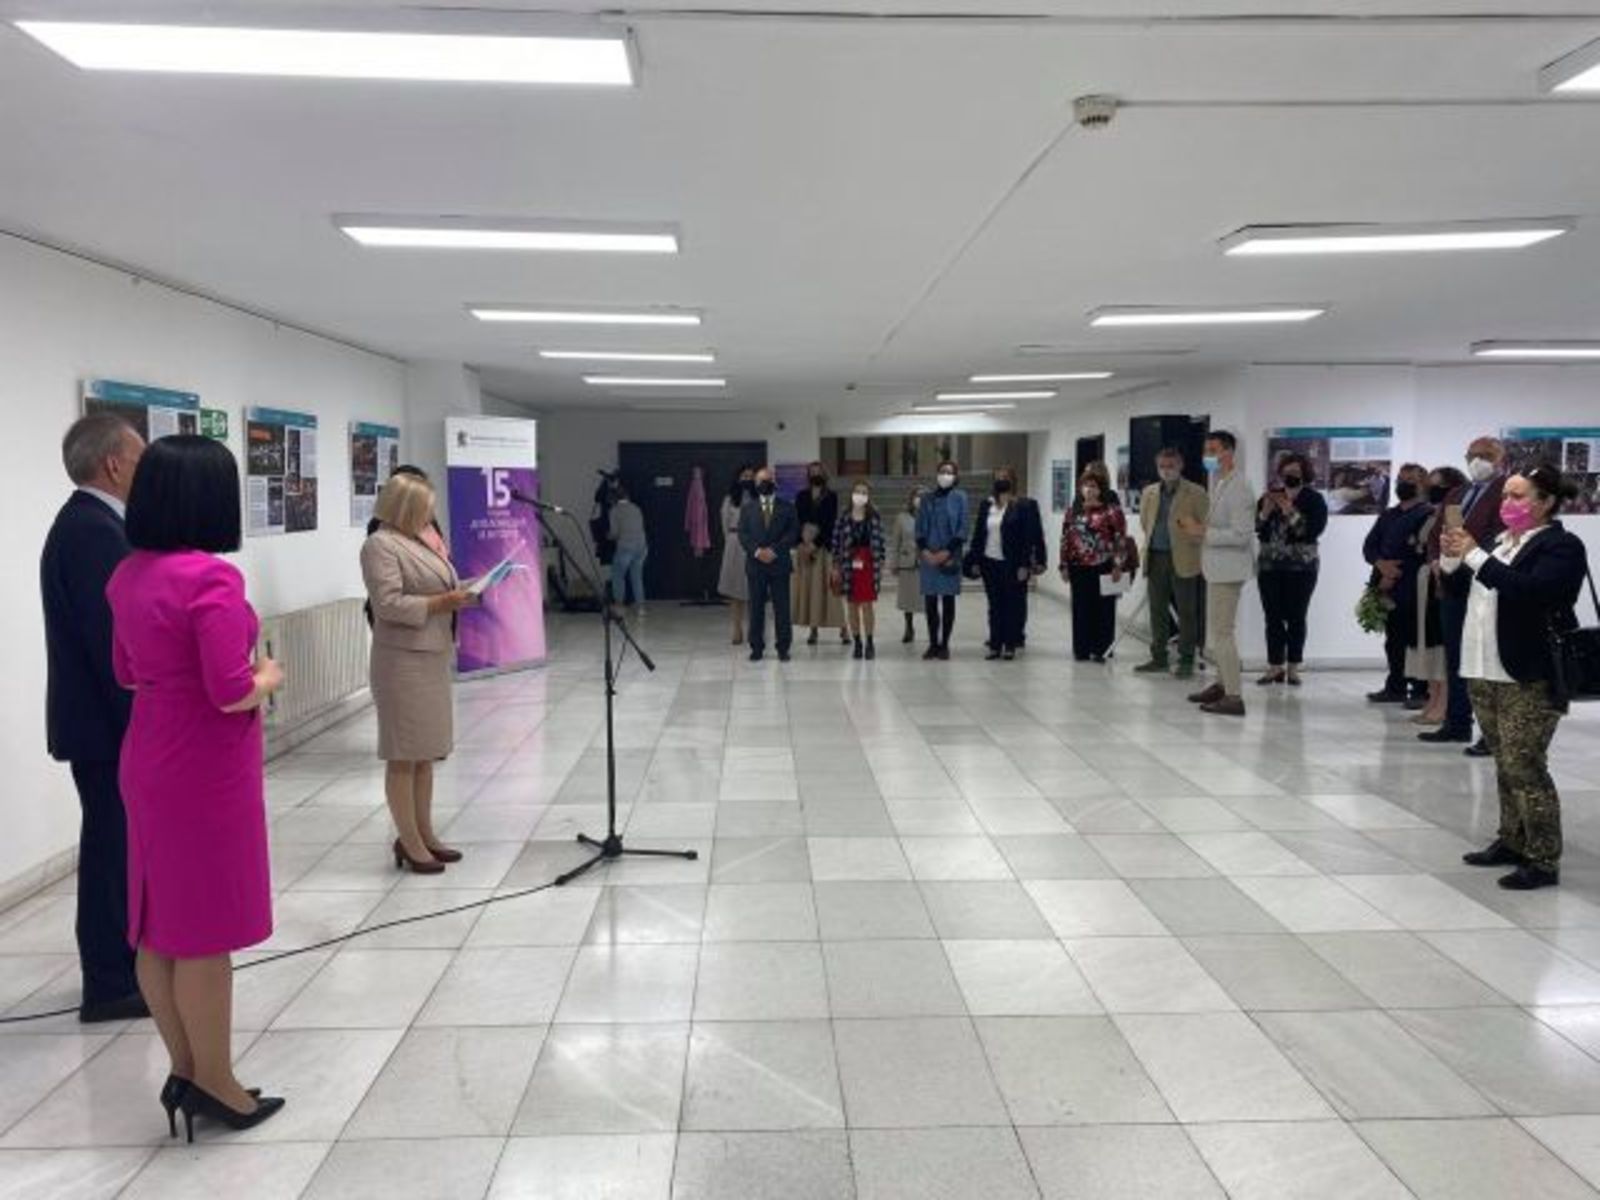 "A JOURNEY FROM LIVING TRADITIONS. INTANGIBLE CULTURAL HERITAGE IN SOUTHEAST EUROPE"- EXHIBITION ON THE OCCASION OF 65 YEARS SINCE BULGARIA'S ACCESSION TO UNESCO VISITS THE MINISTRY OF FOREIGN AFFAIRS